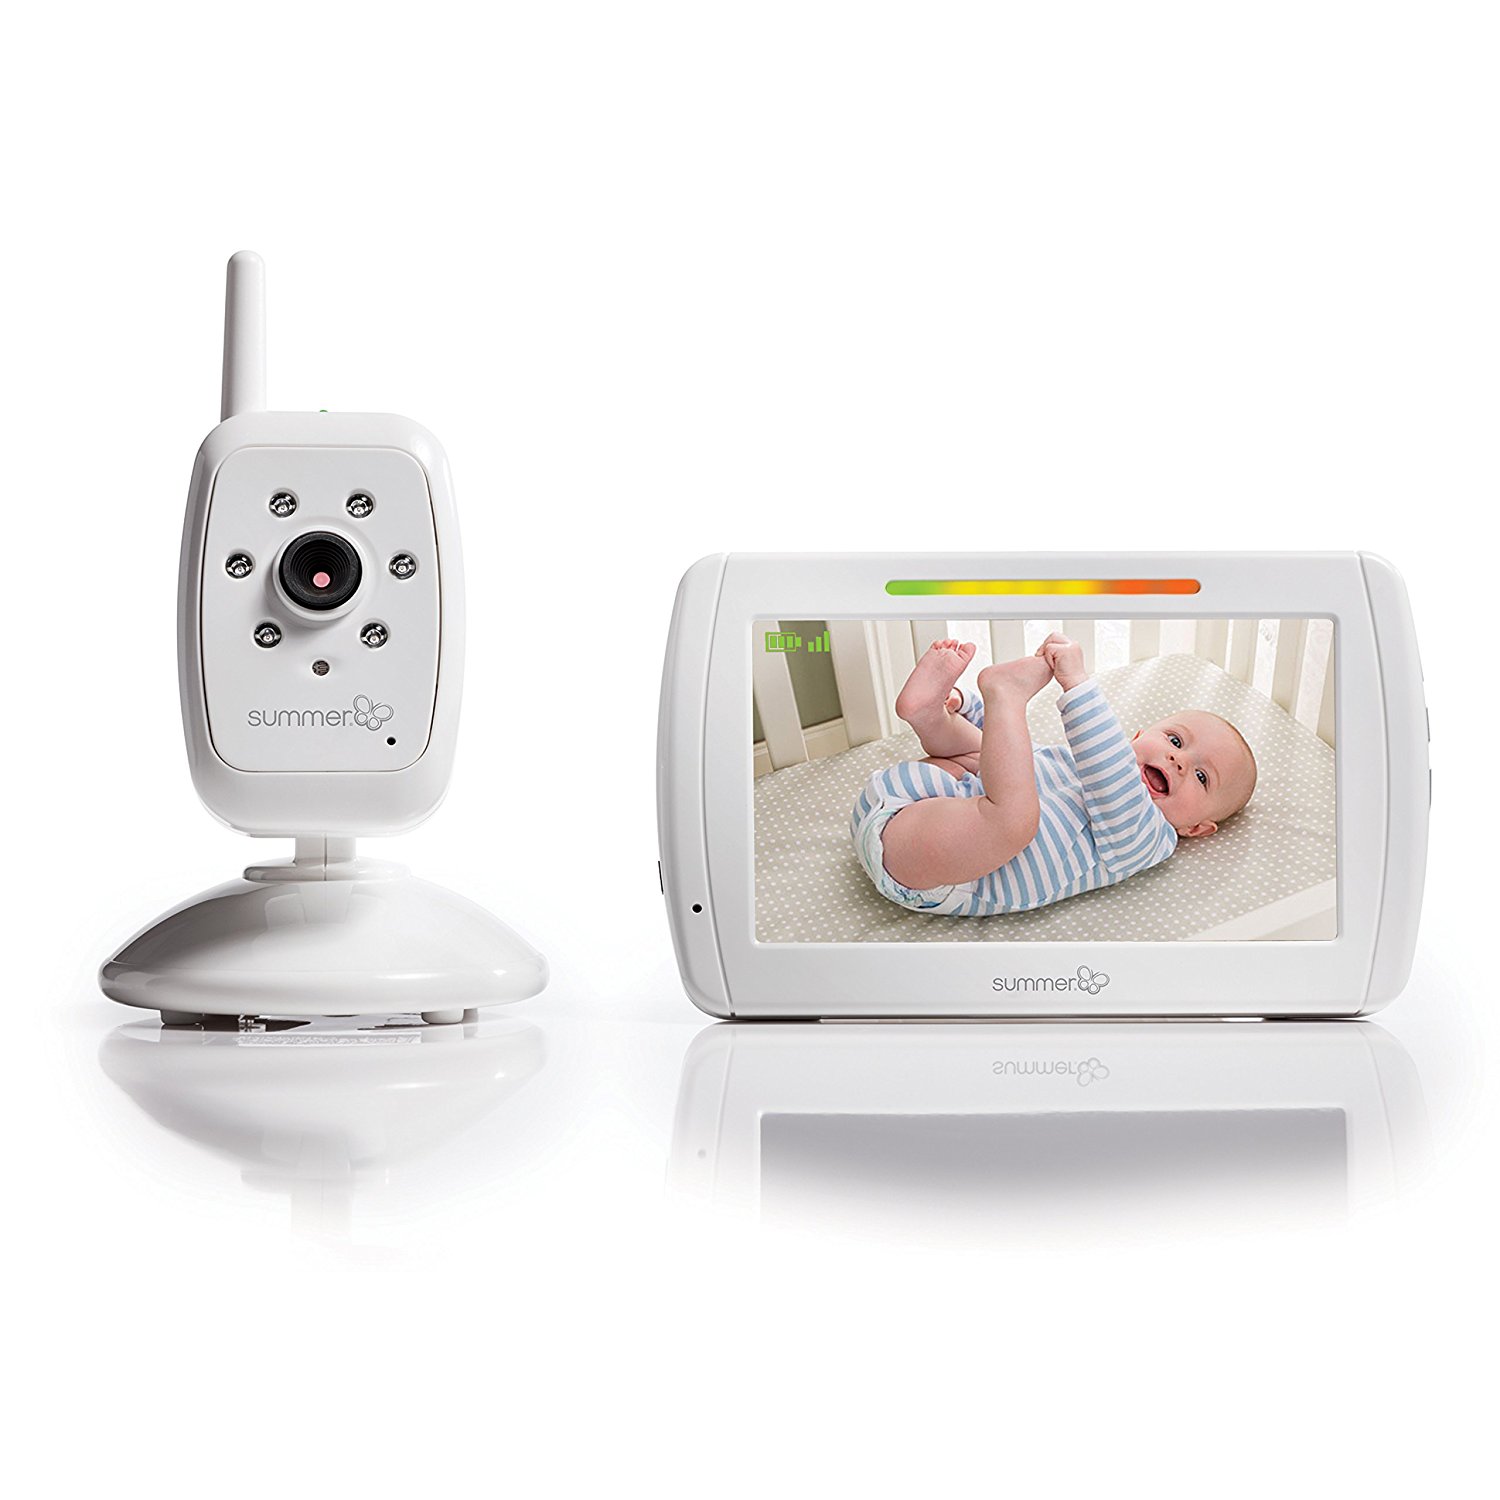 Top 10 Best Baby Monitors 2017 - Top Value Reviews